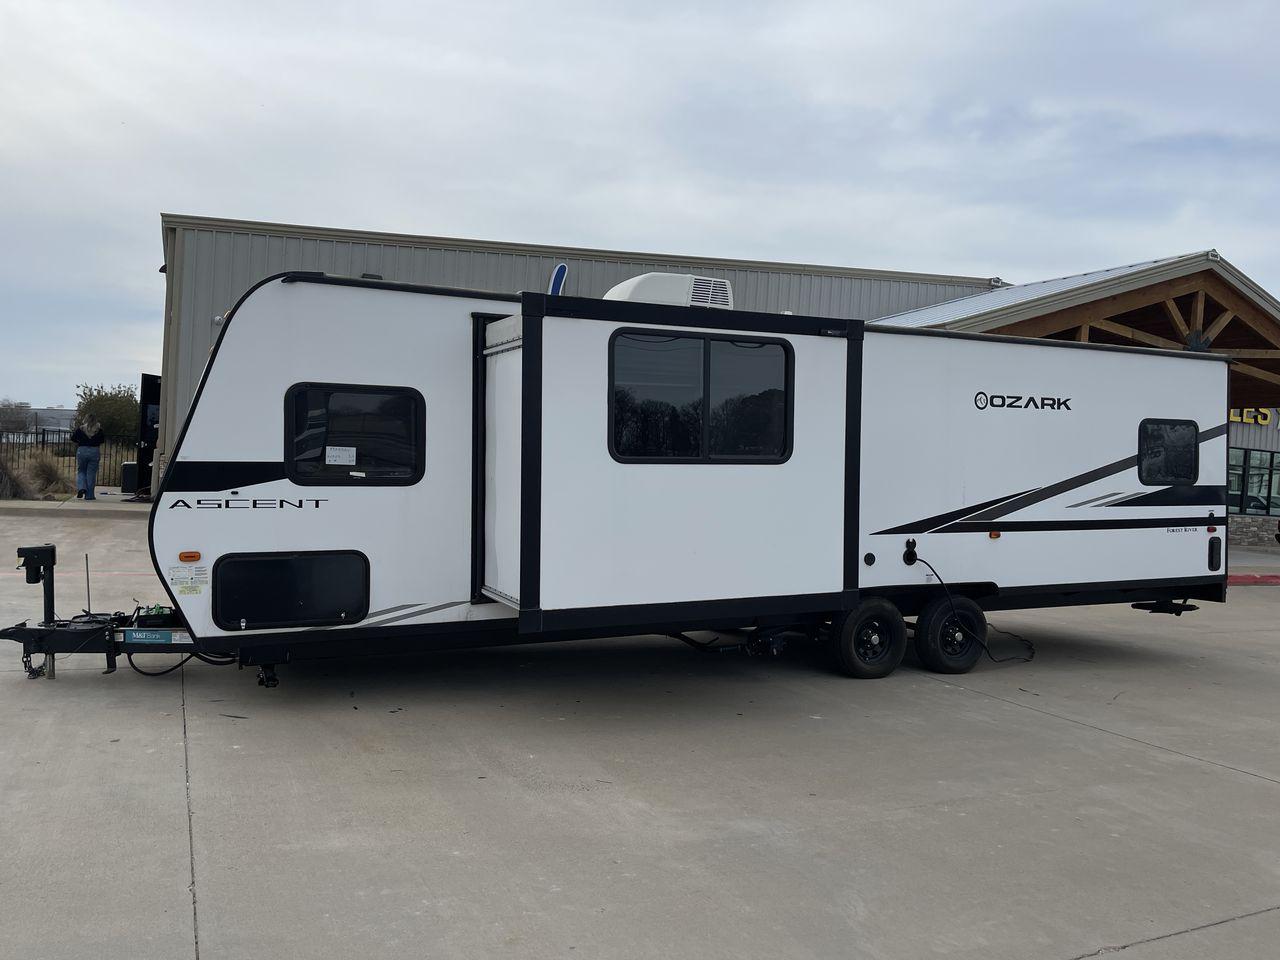 2021 FOREST RIVER OZARK 2700THX (5ZT2ZKSB7MG) , Length: 32.33 ft. | Dry Weight: 5,683 lbs. | Gross Weight: 7,830 lbs. | Slides: 1 transmission, located at 4319 N Main Street, Cleburne, TX, 76033, (817) 221-0660, 32.435829, -97.384178 - Measuring ~32 feet in length, this RV combines compactness with functionality, making it an ideal choice for both weekend getaways and extended road trips. The Ozark 2700THX features a features a single slide-out, providing a well-designed and spacious interior. The 2700THX boasts a dedicated garage - Photo #20